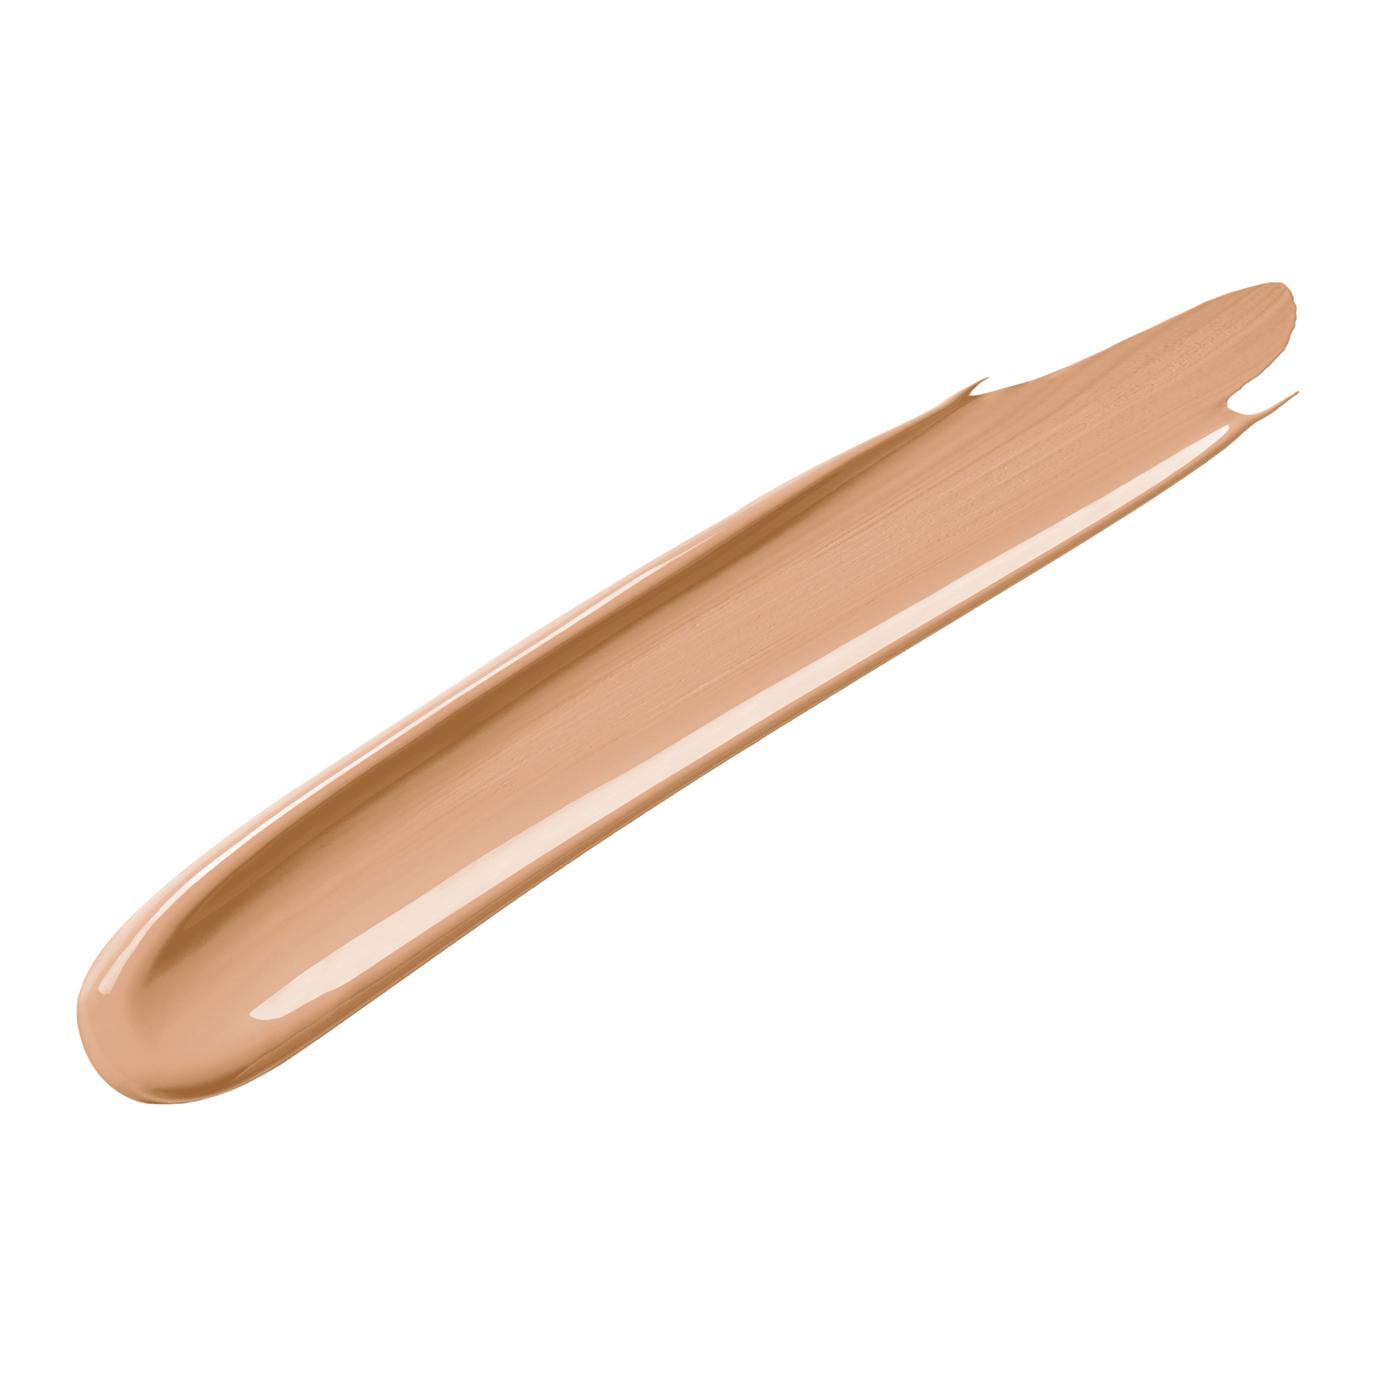 Covergirl Clean Invisible Concealer - Warm Nude; image 8 of 15